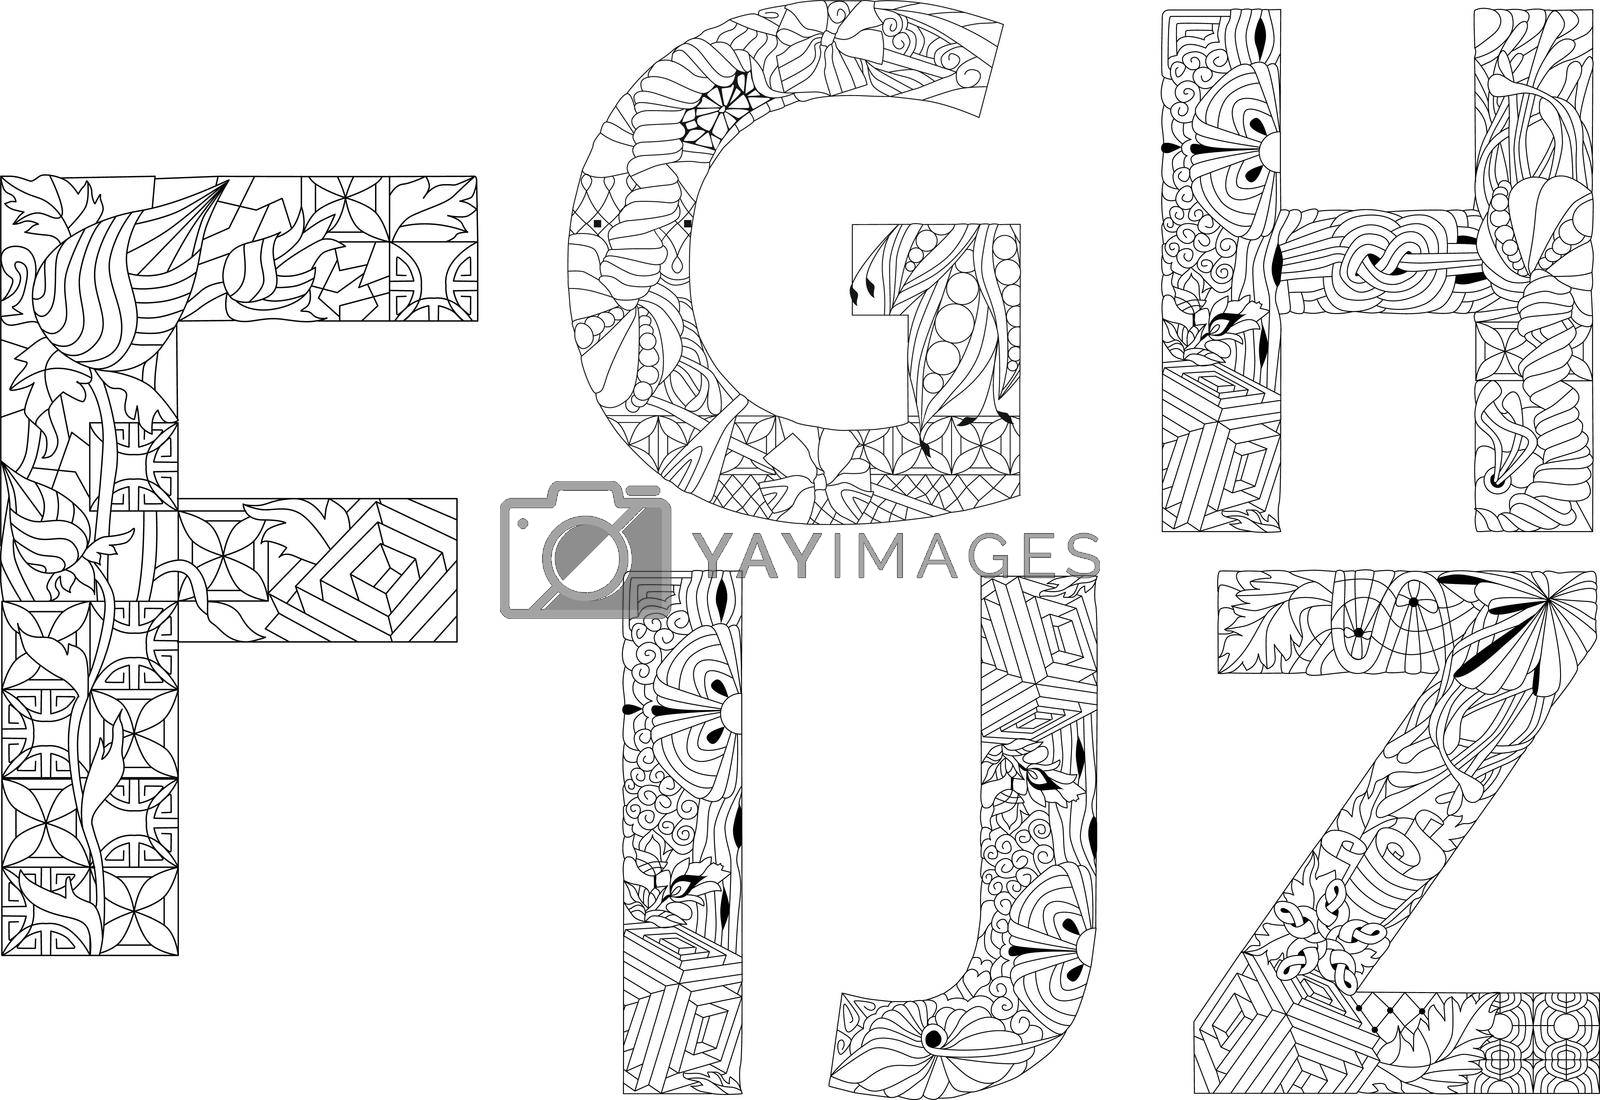 Royalty free image of Vector of hand drawn set of Alphabet from F - J in Zentangle style for coloring pages by NataOmsk